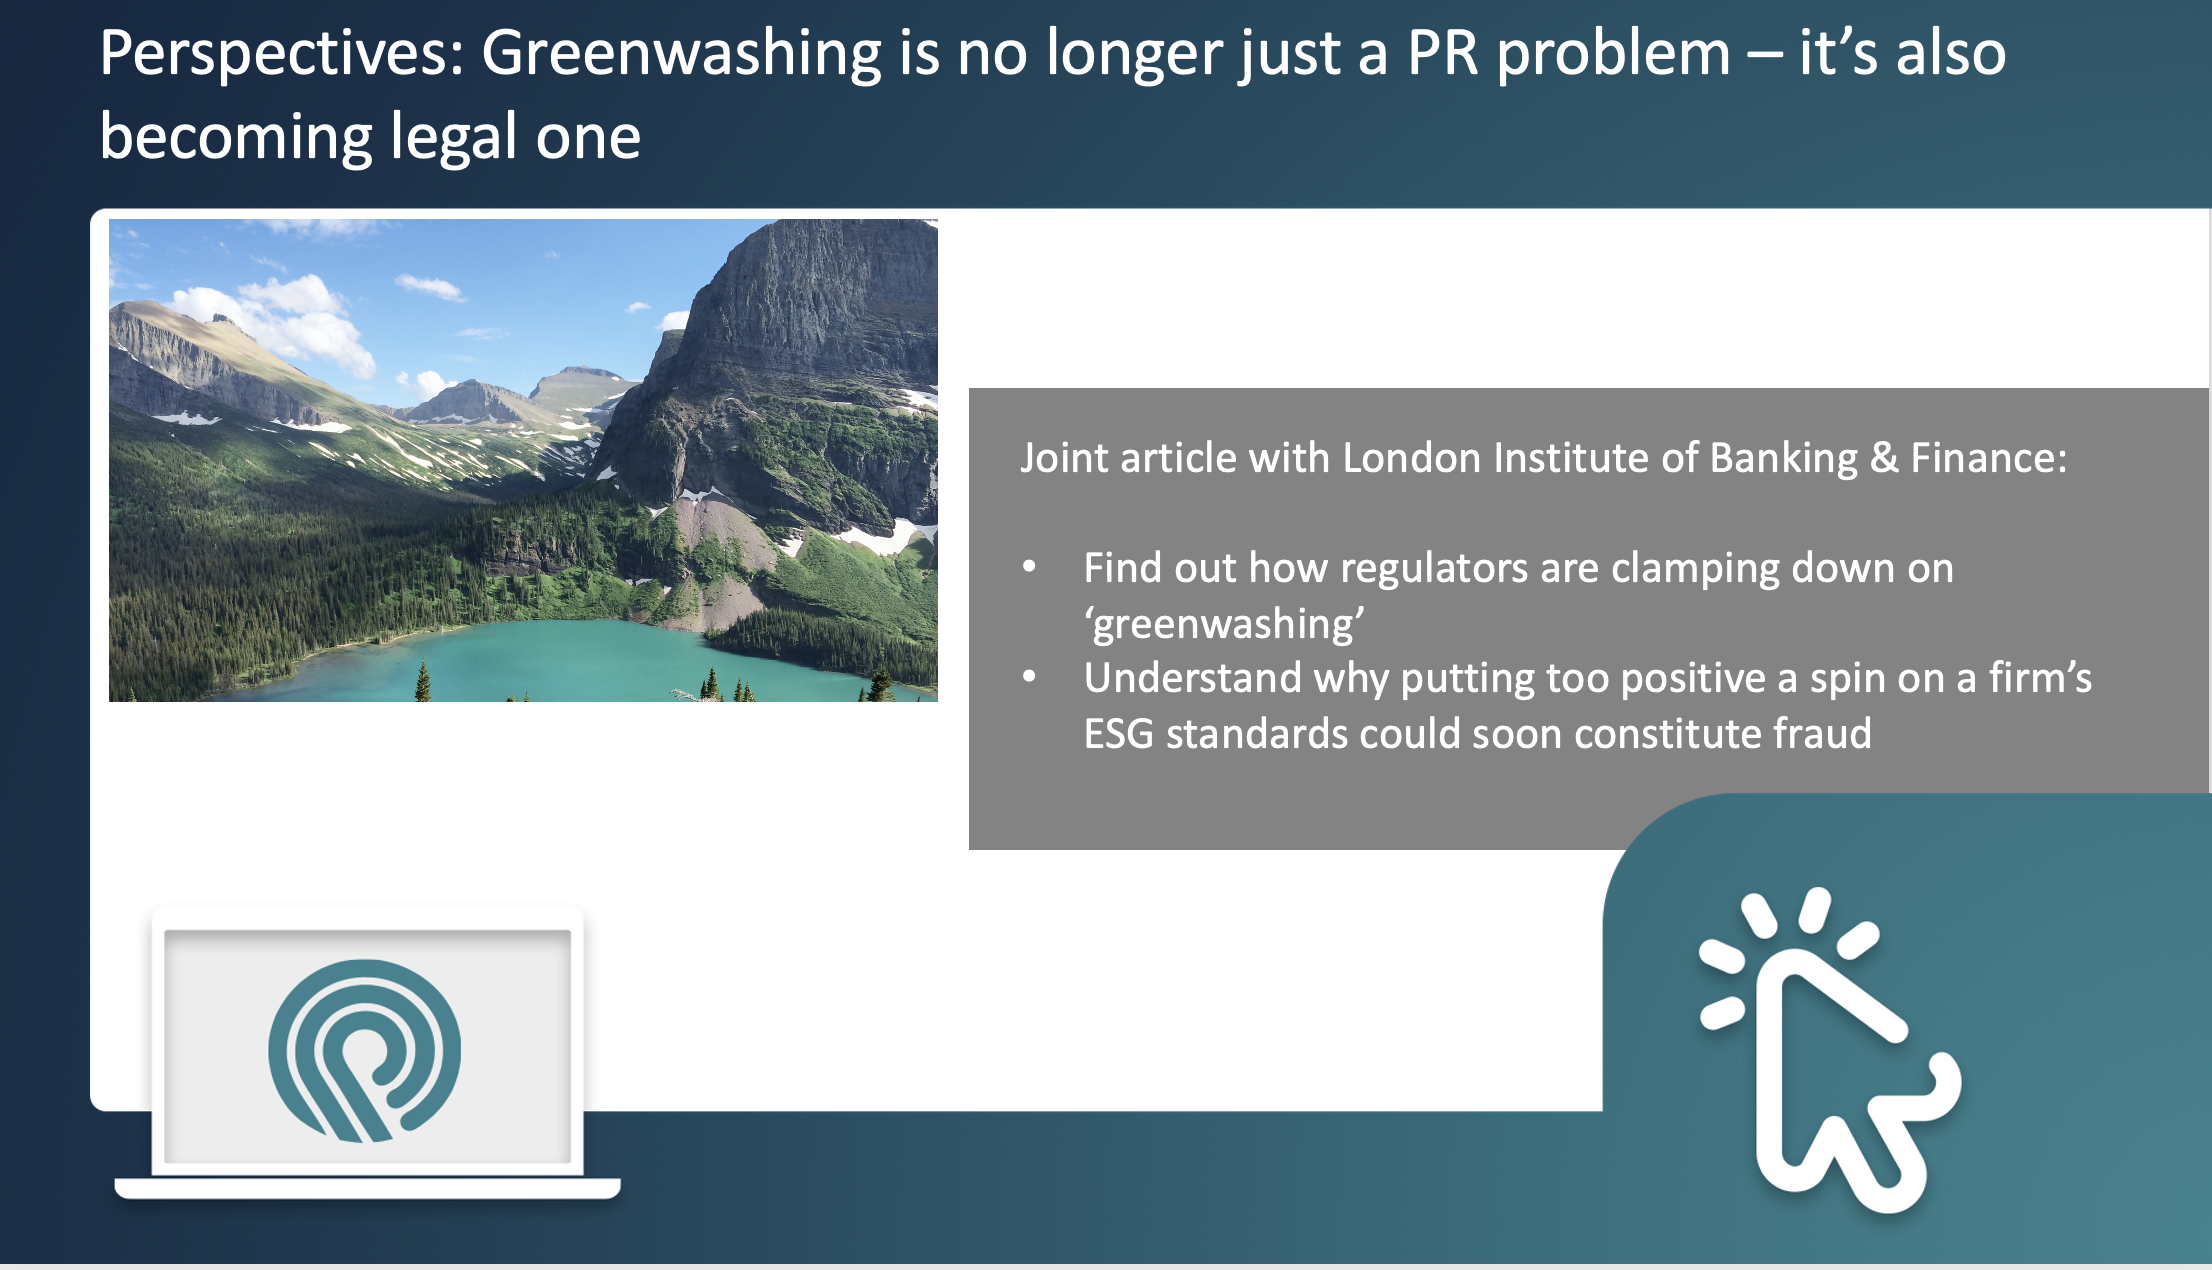 Greenwashing is no longer a PR problem – it’s also a legal one